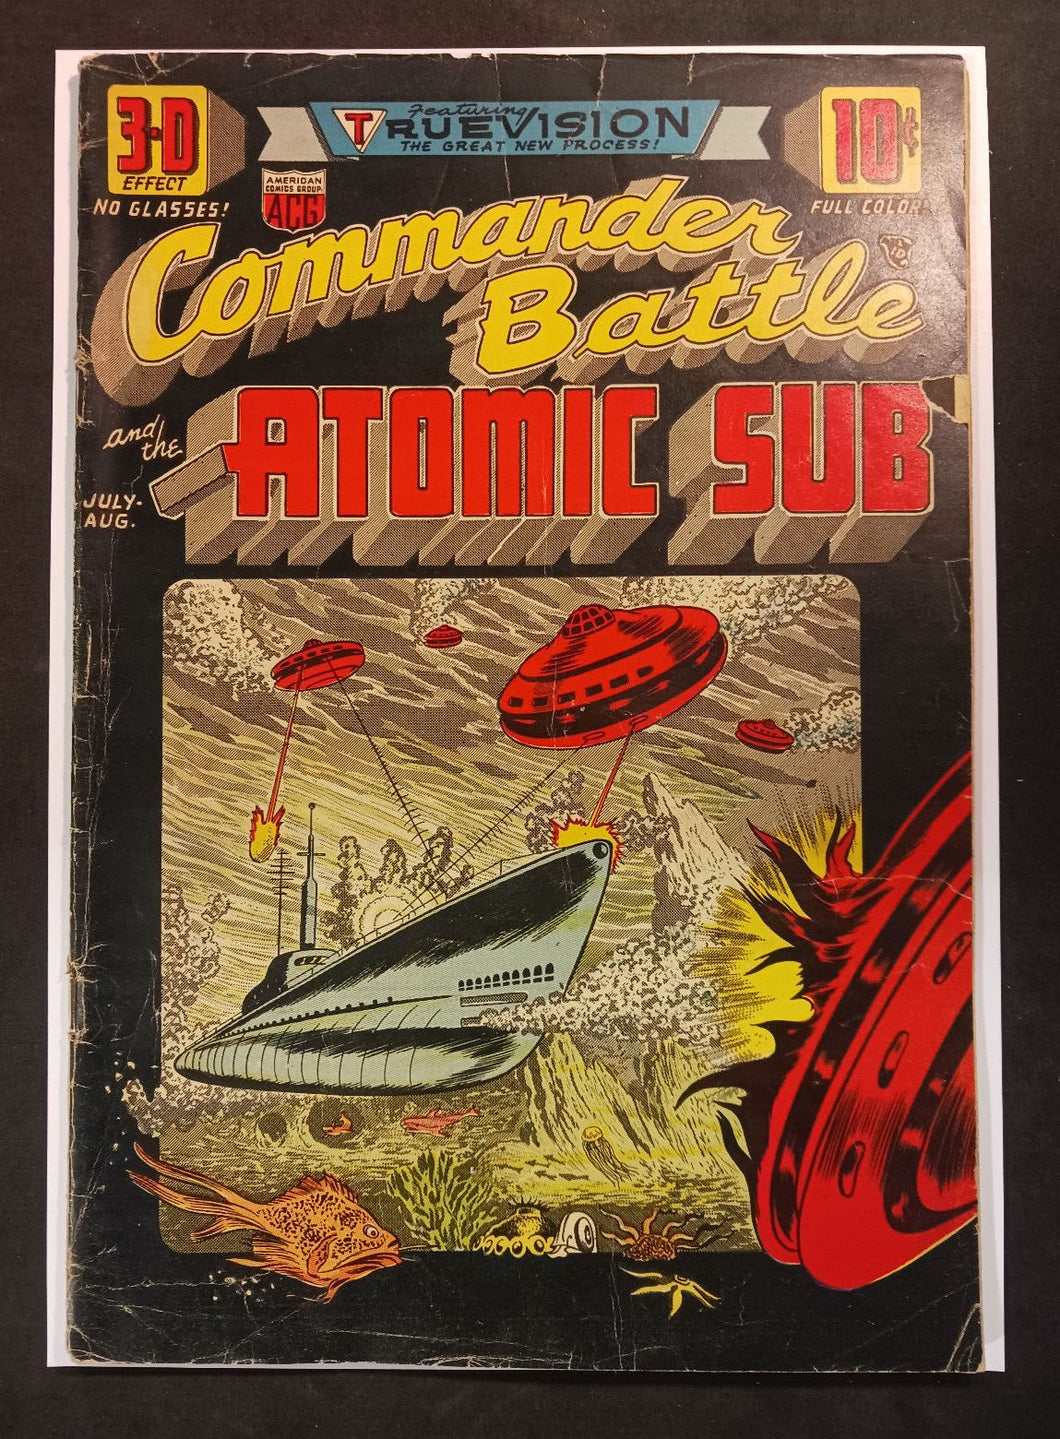 1954 3-D Effect Commander Battle and the Atomic Sub #1